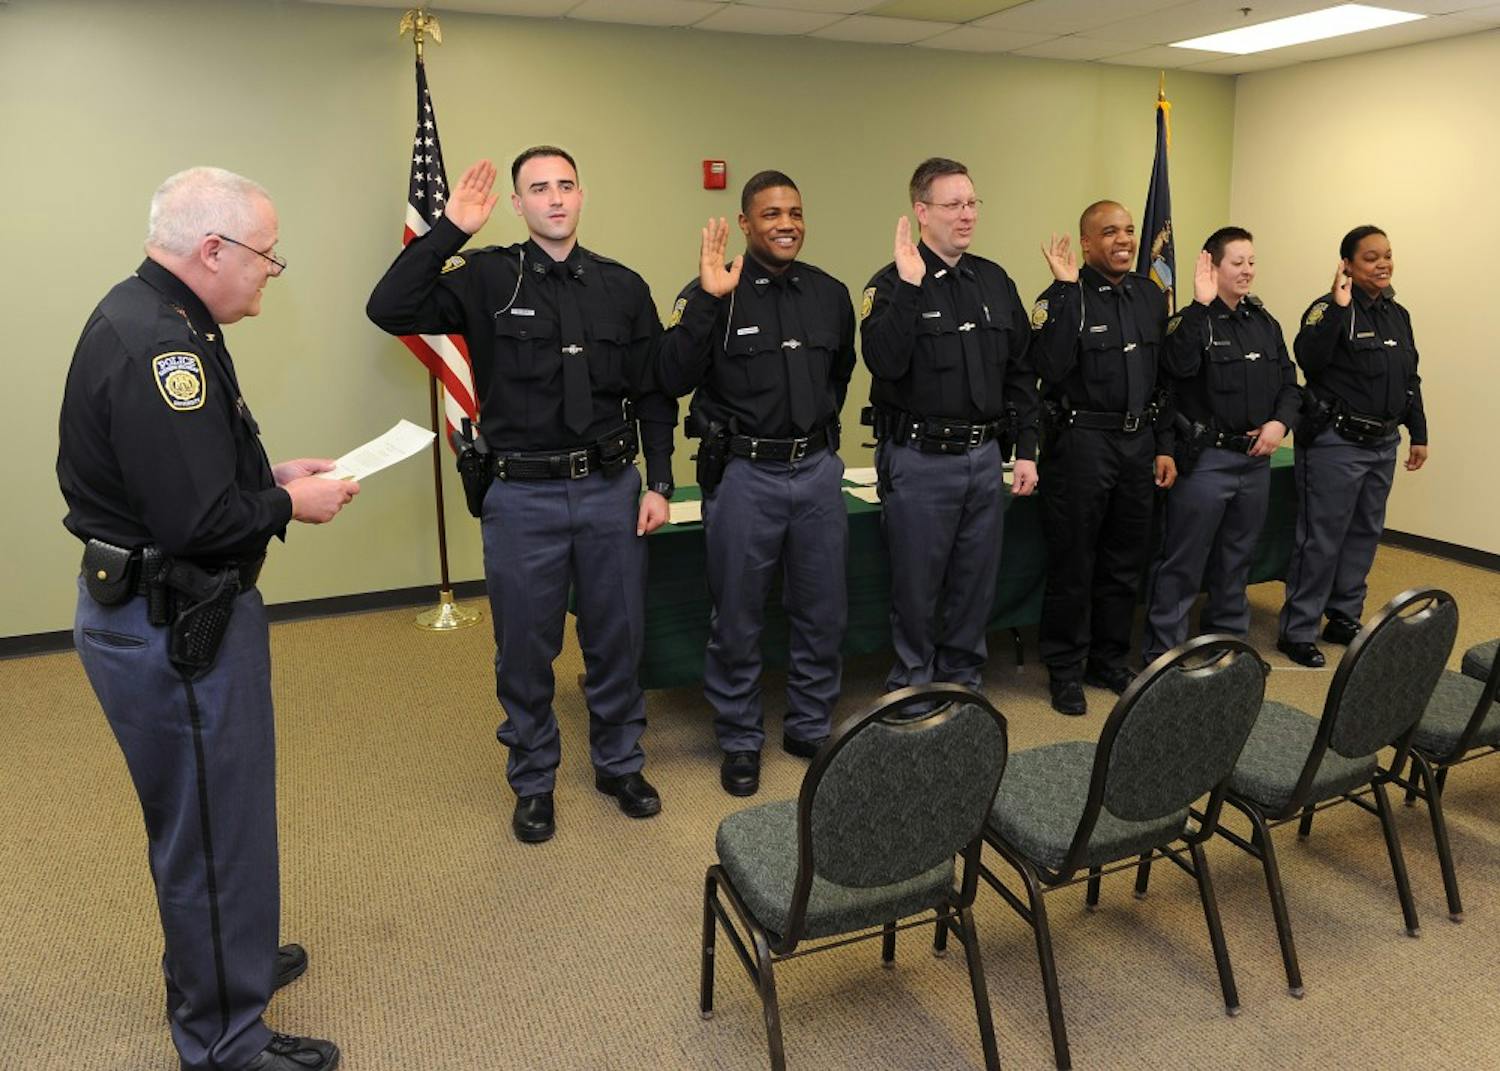 EMU Cheif Heighes swears in 6 new officers.